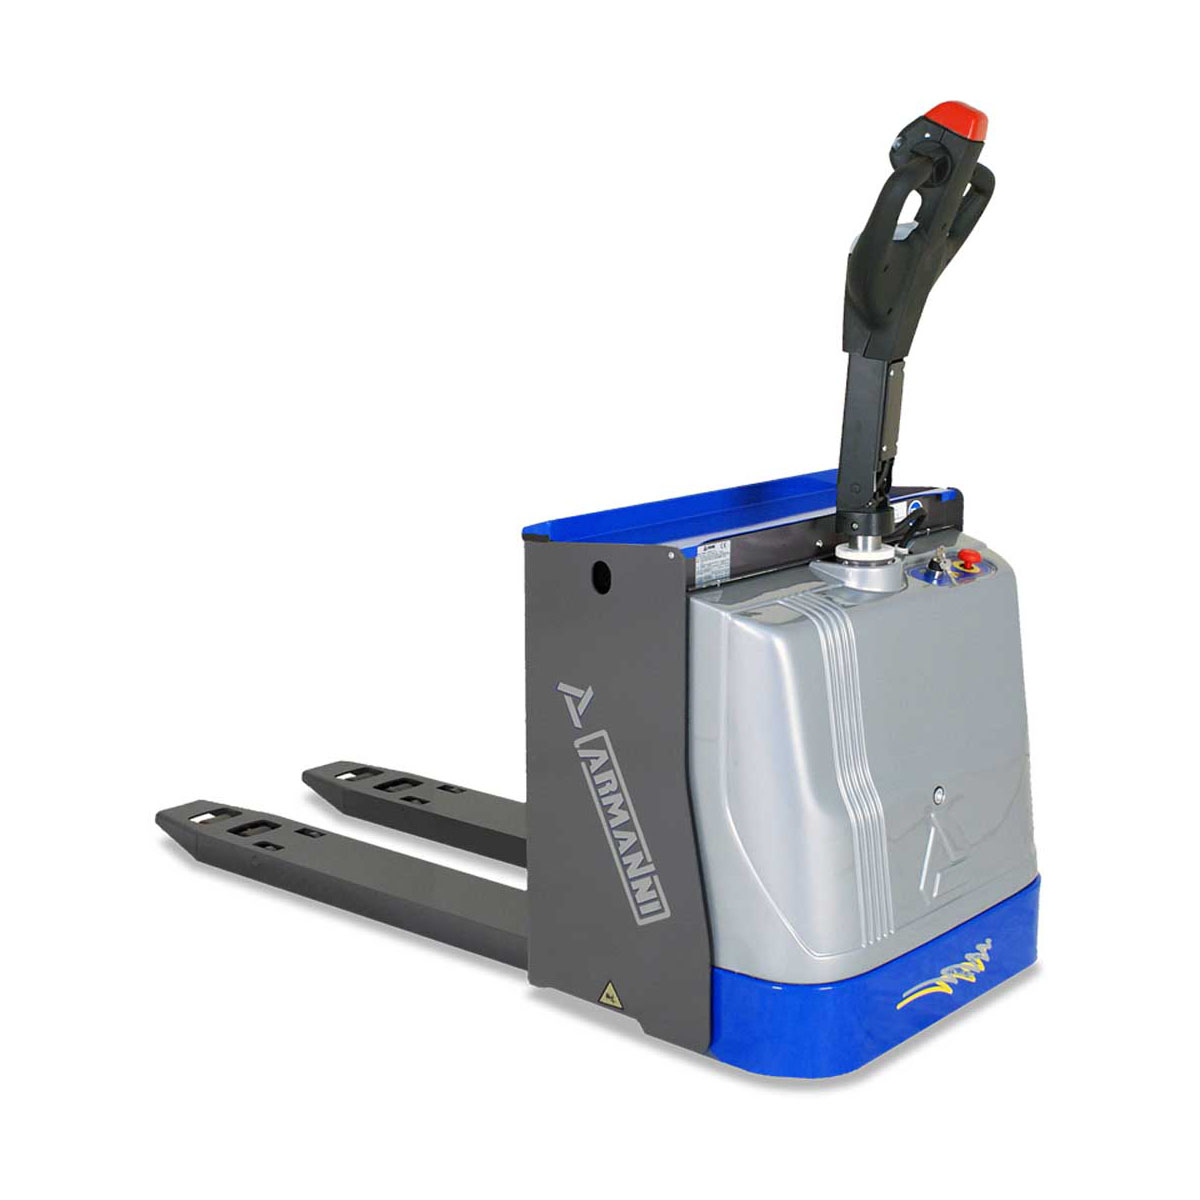 Buy Electric Pallet Trucks - DISCOVERY available at Astrolift NZ